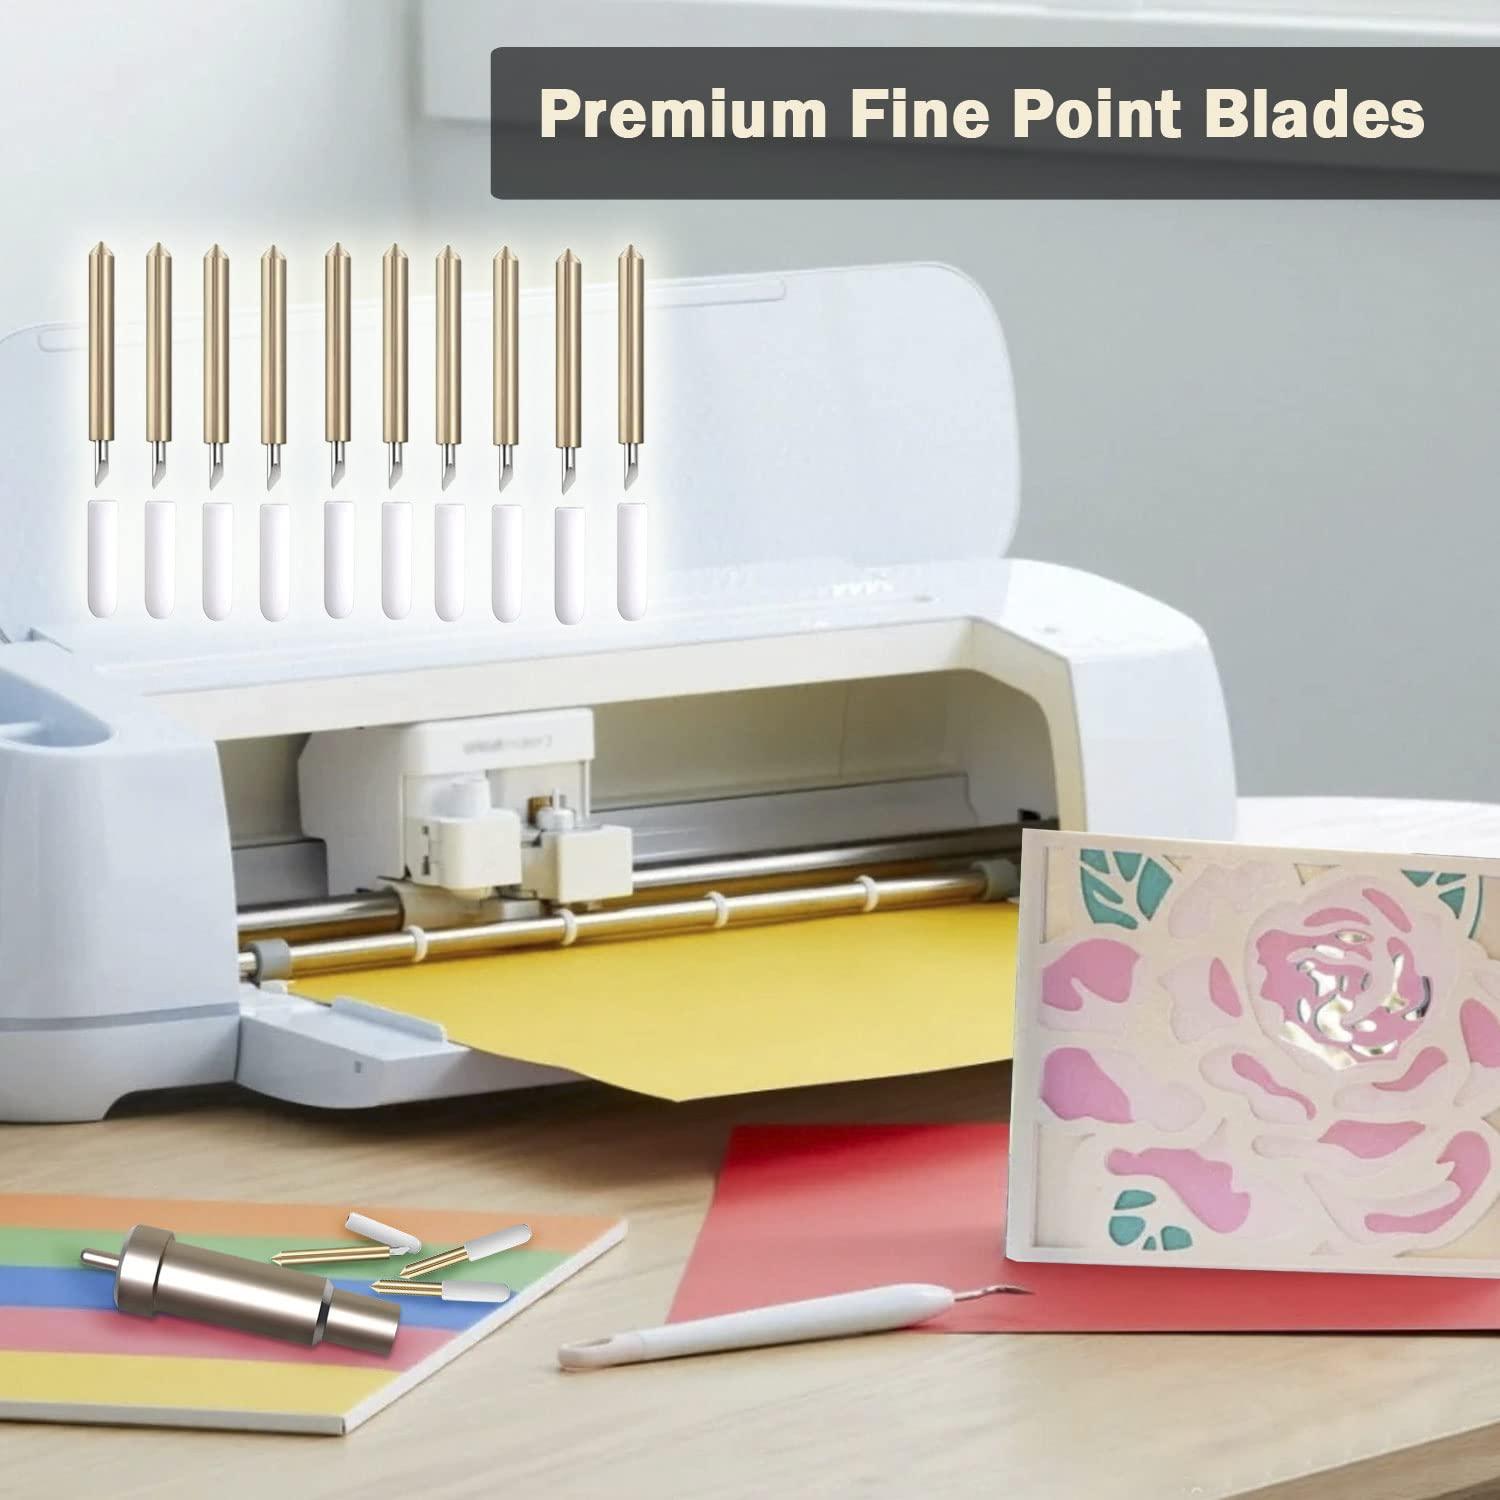 Premium Fine Point Blade With Housing For Cricut Maker, For Cricut Explore  Air2/ Air3/ Cricut Maker/Maker 3 - AliExpress